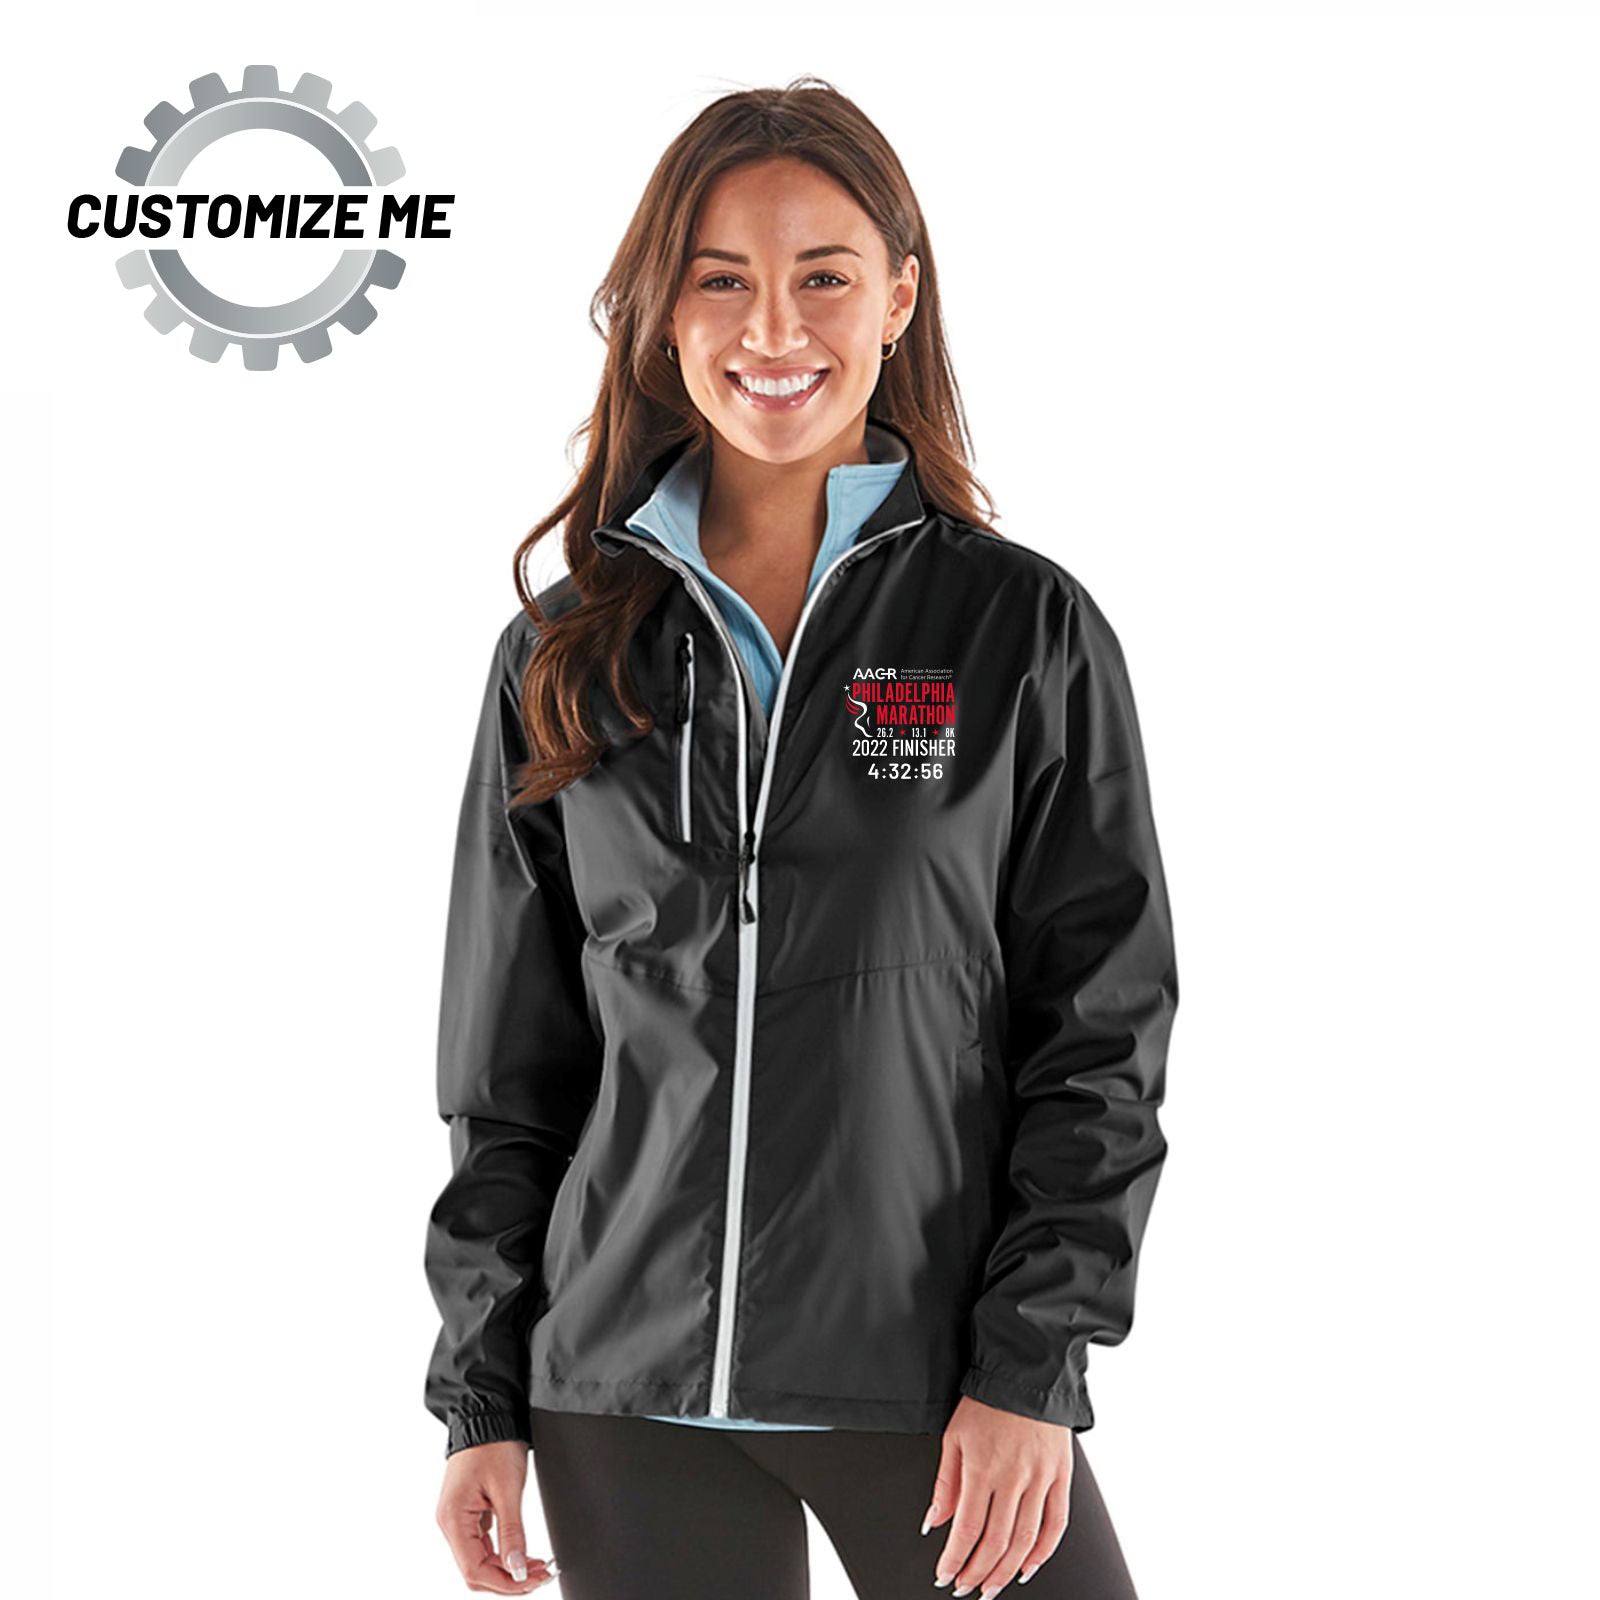 Women's Lightweight Zip Eco Jacket -Black- AACR 2022 Finisher Embroidery